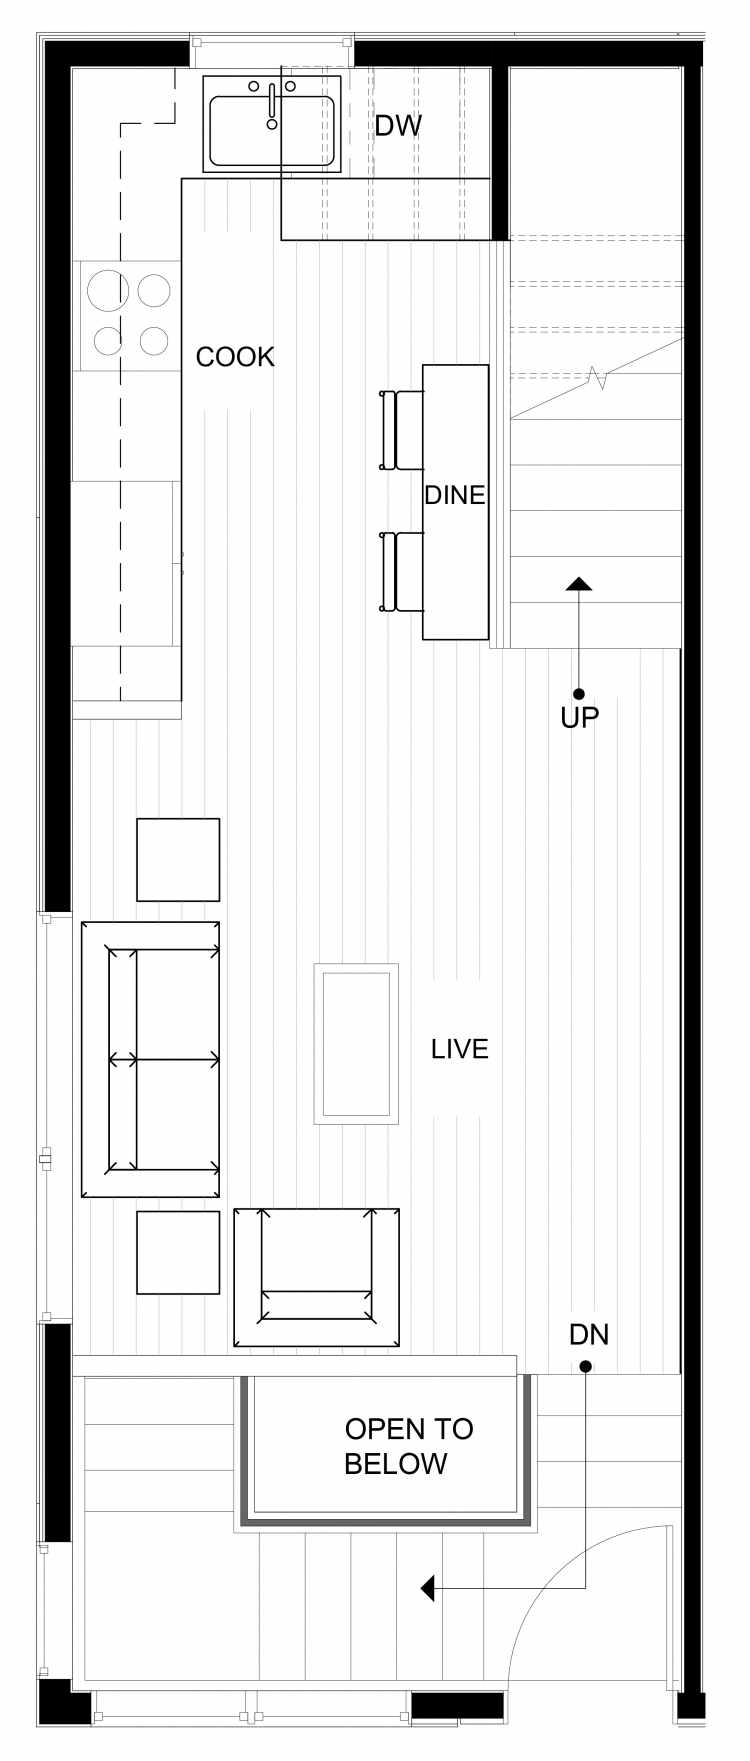 Second Floor Plan of 1544 15th Ave E, One of the Larrabee Townhomes in Capitol Hill